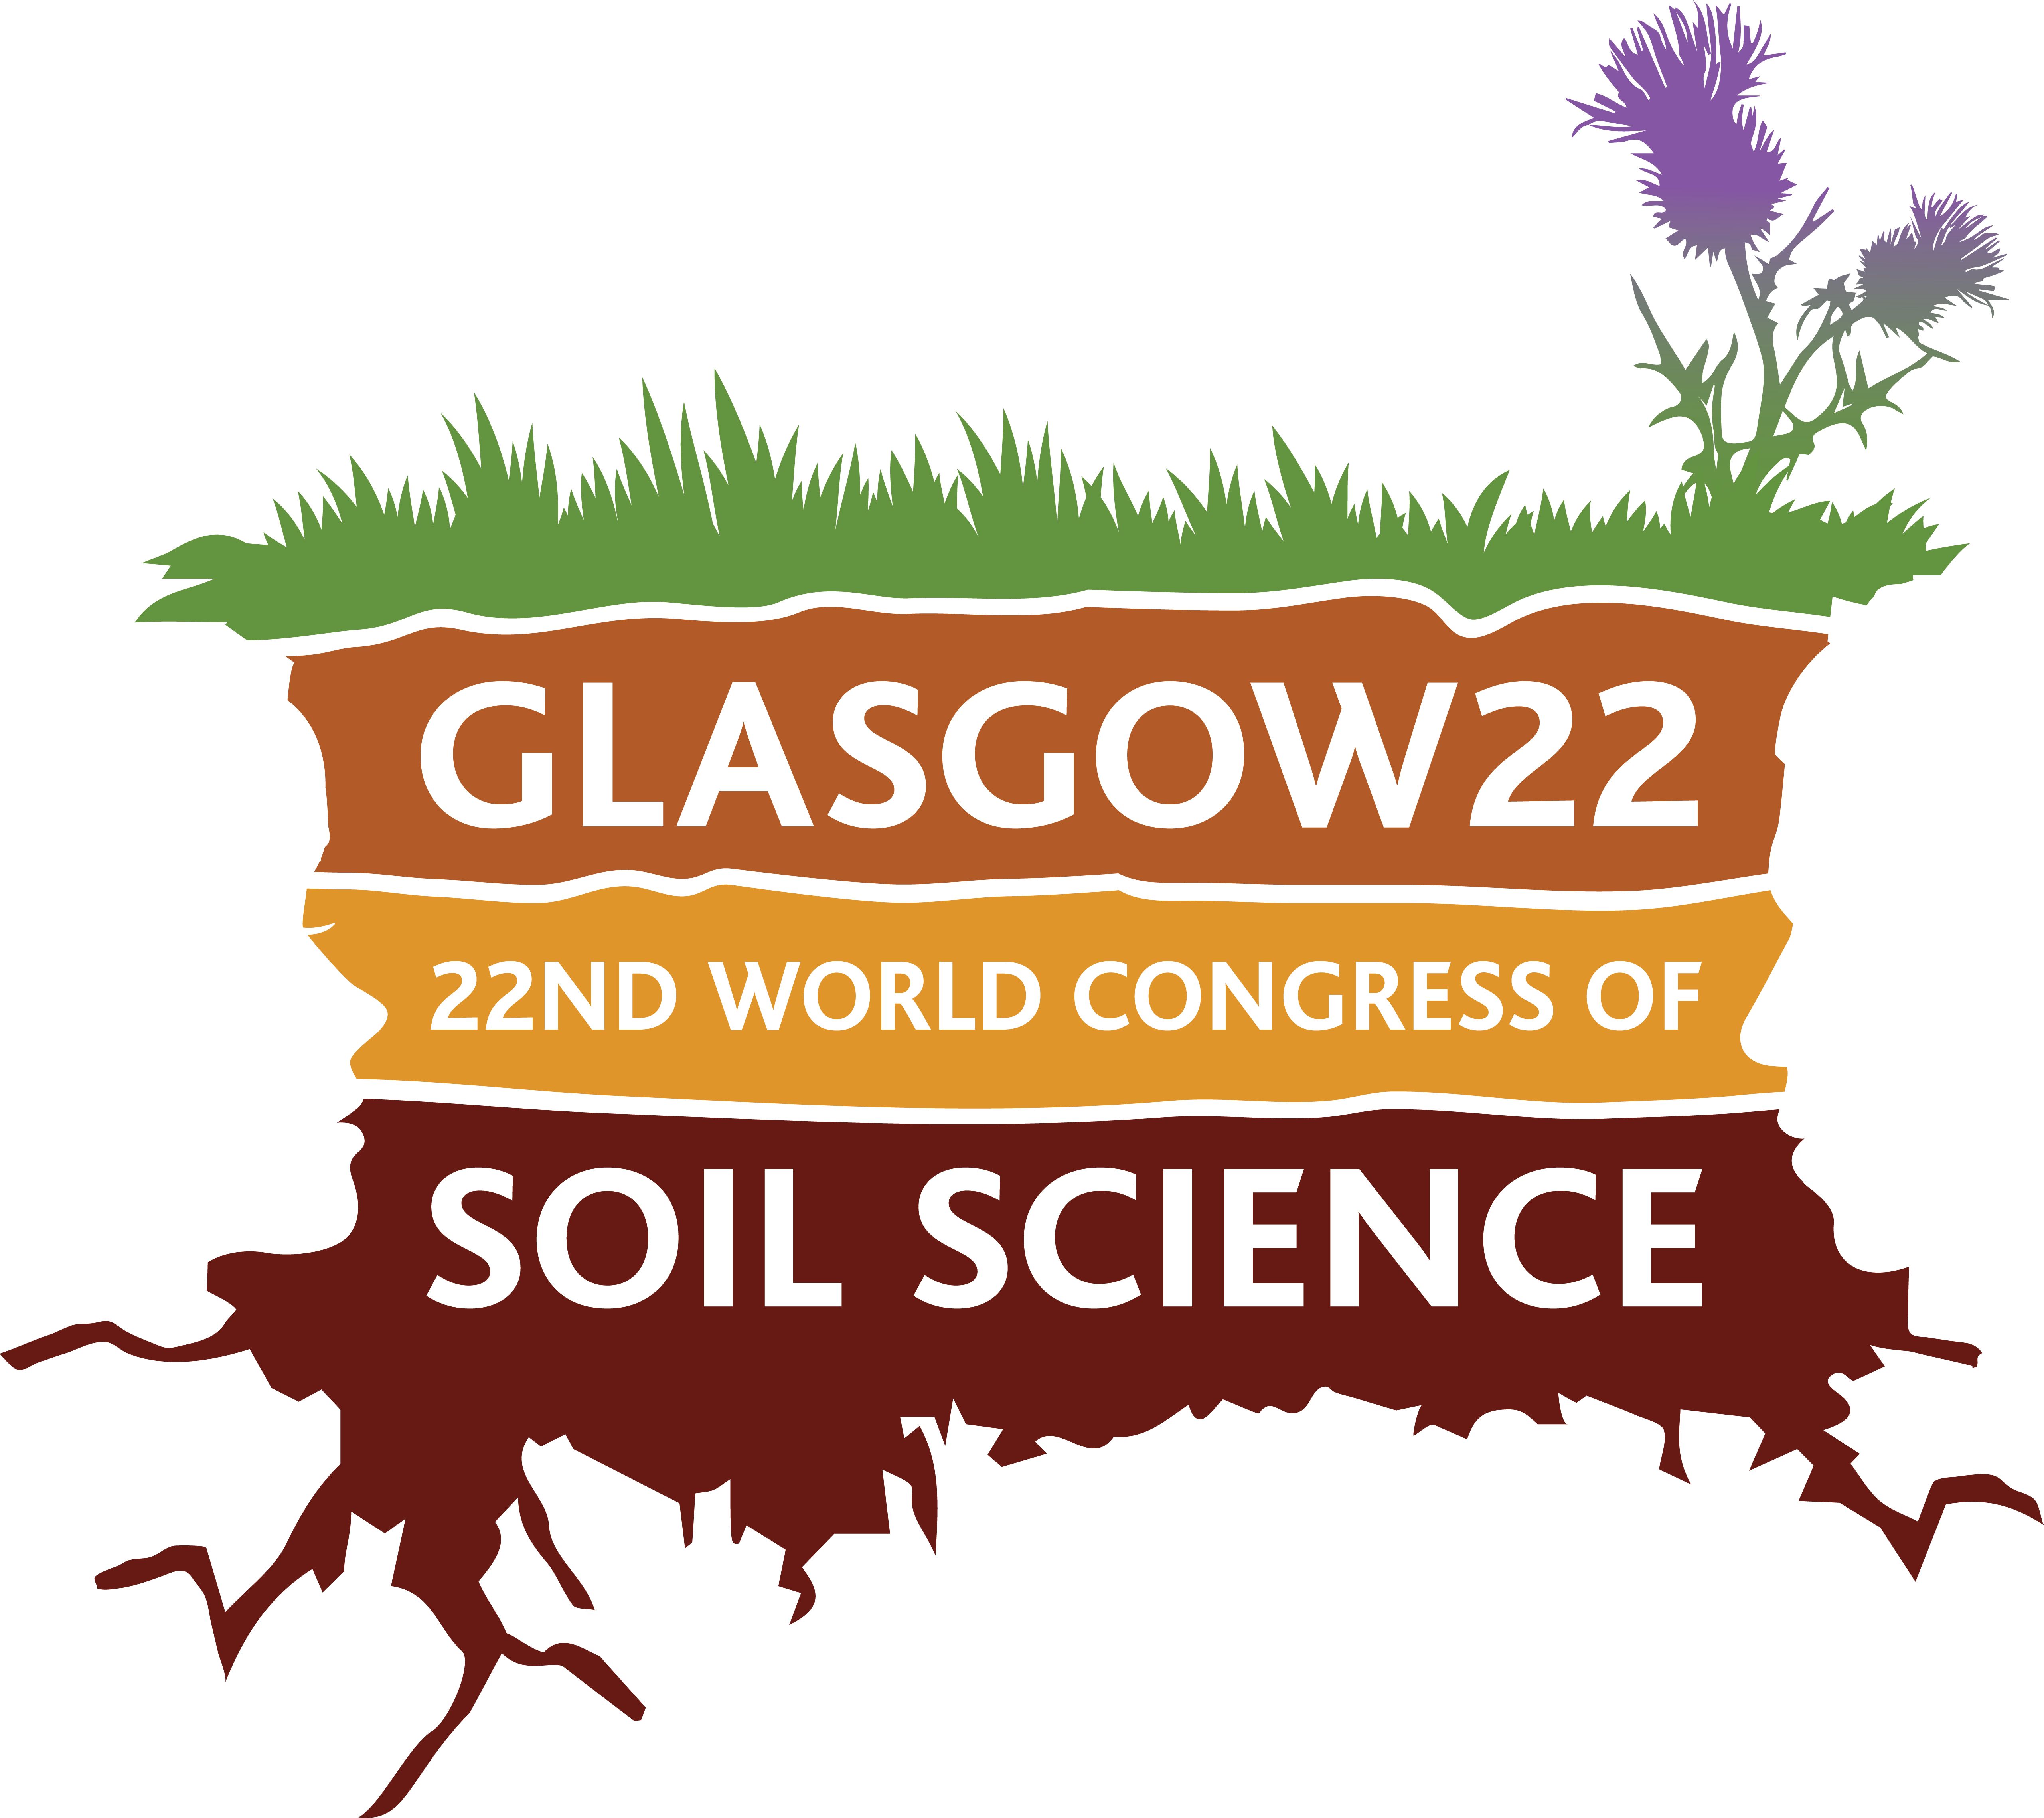 The World Congress of Soil Science 2022